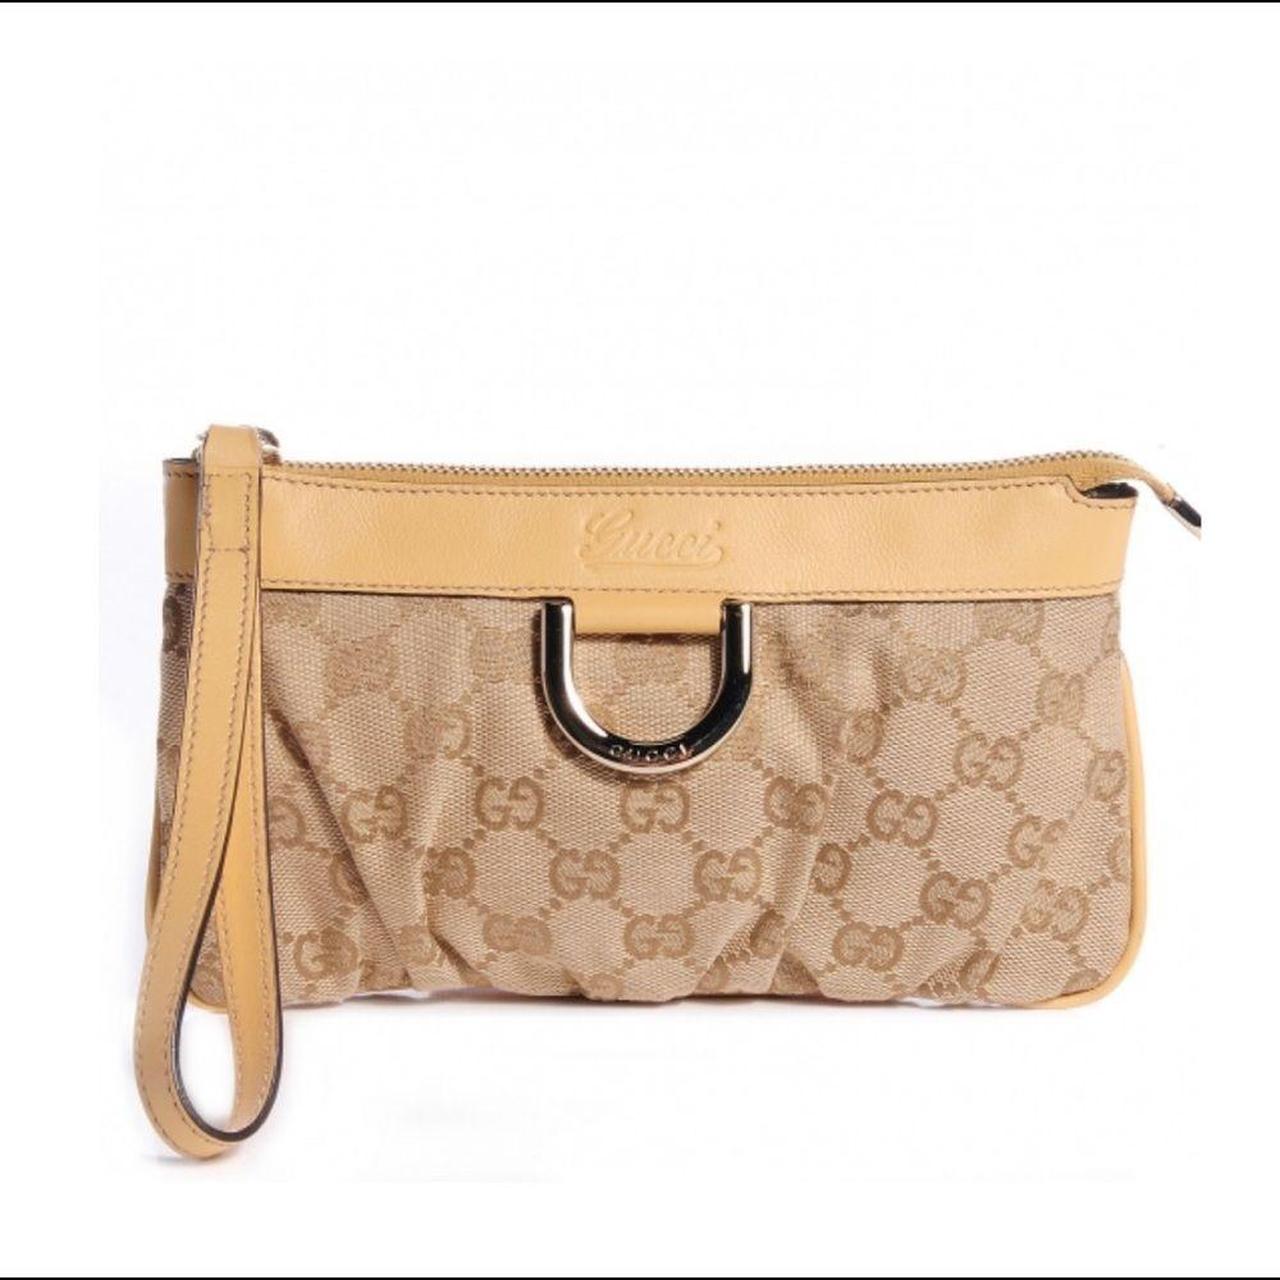 Gucci Women's Yellow and Brown Bag